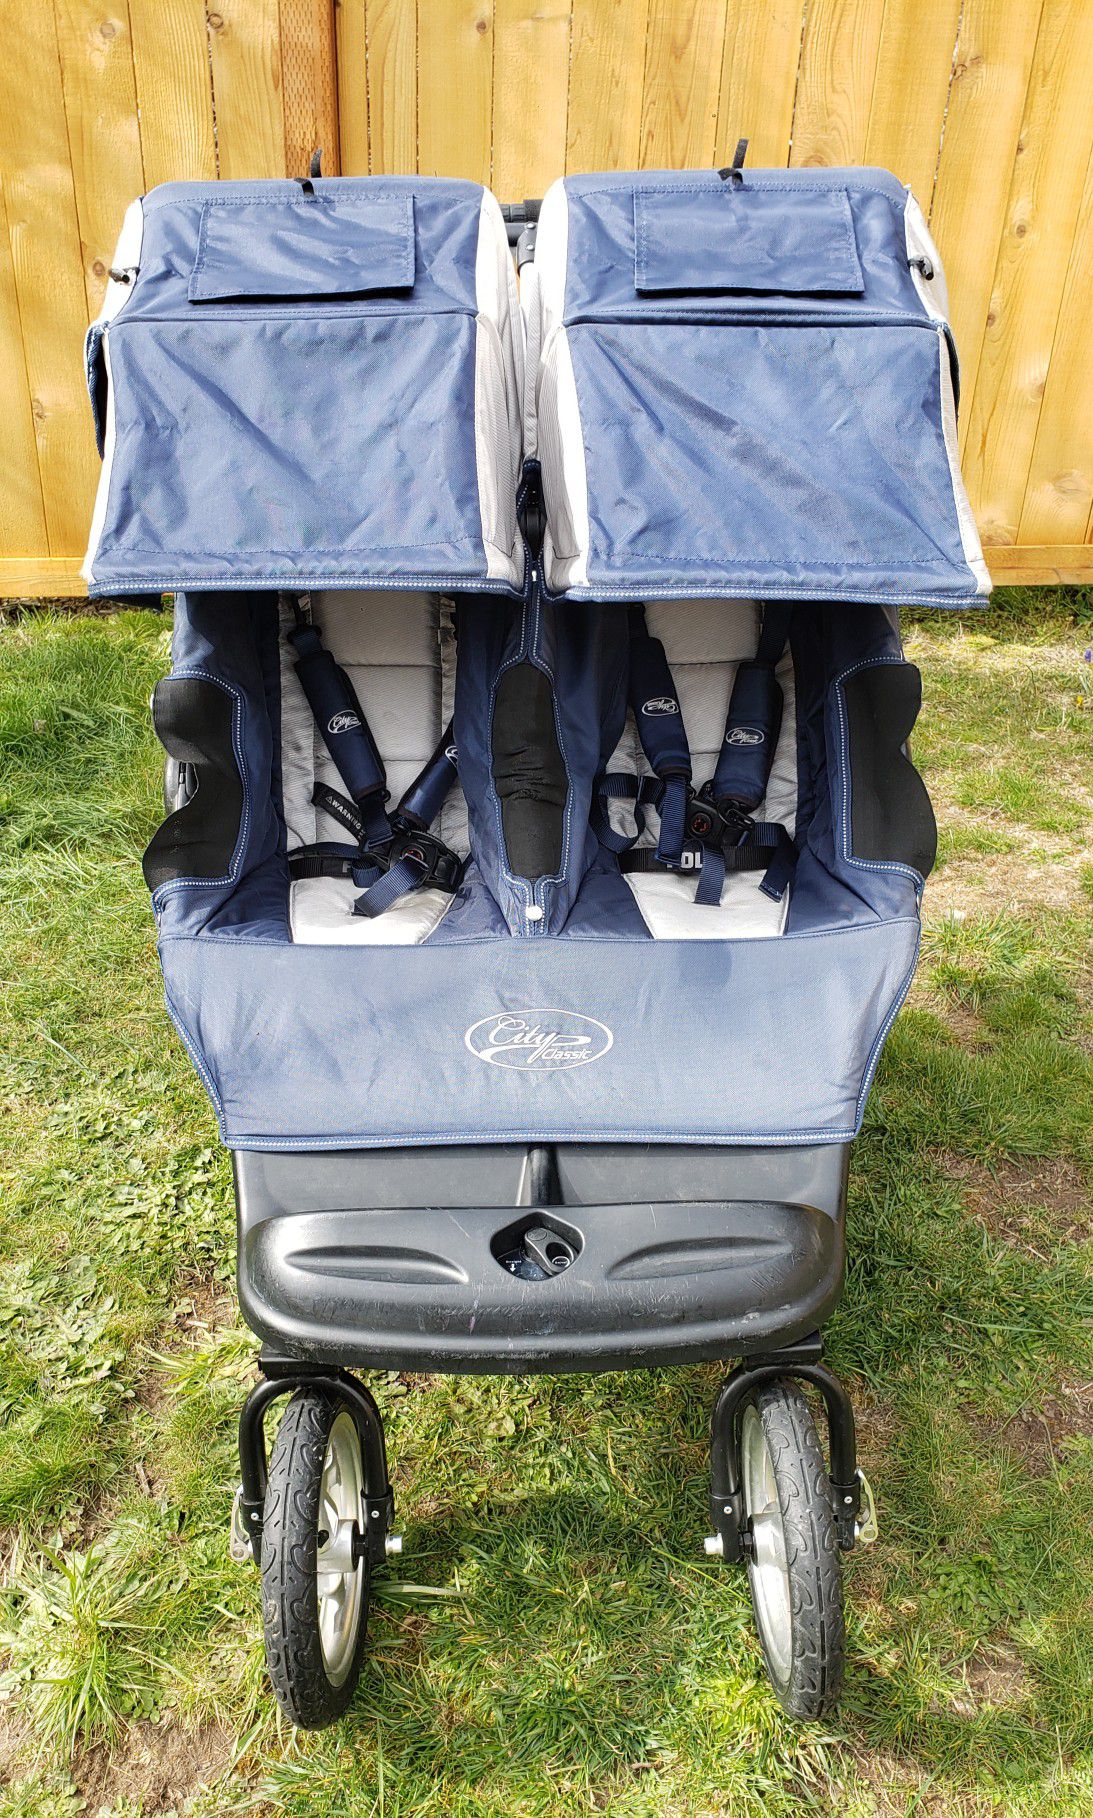 PENDING- Baby Jogger City Classic double stroller